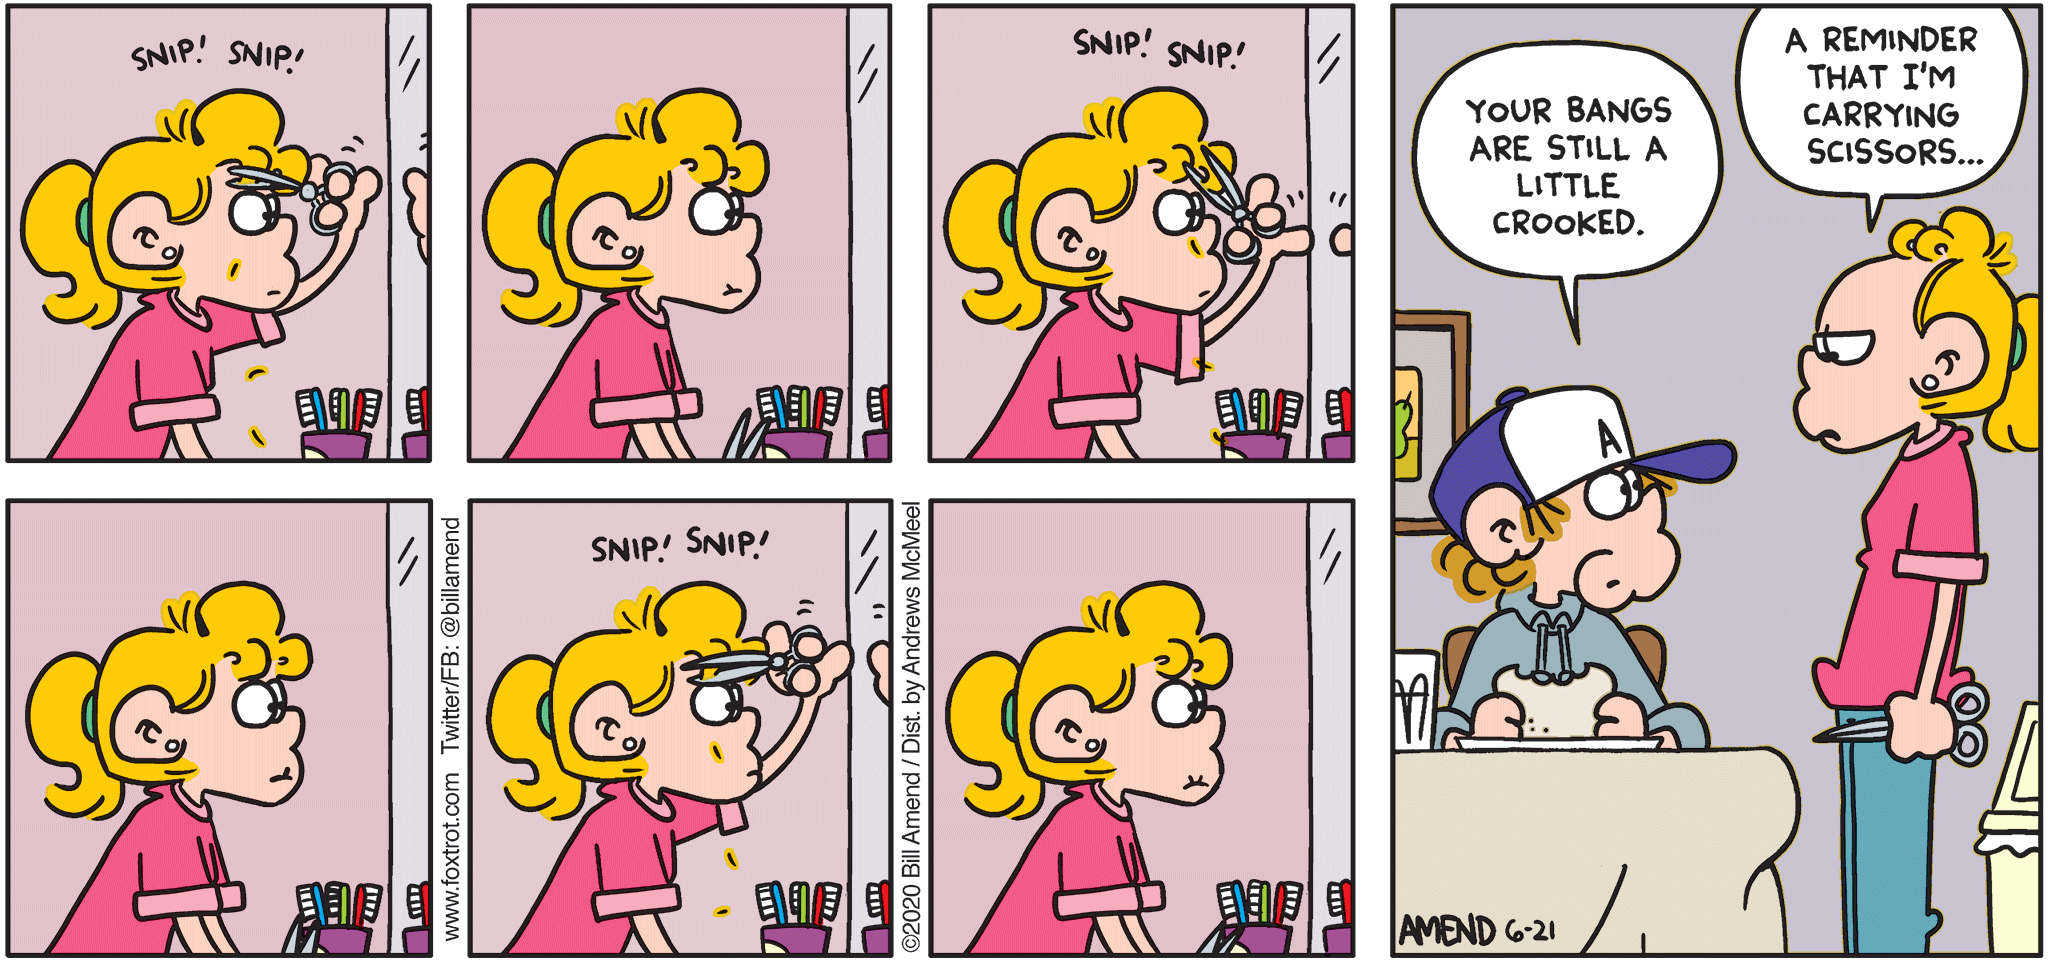 FoxTrot by Bill Amend - "Bangin'" published June 21, 2020 - Peter: Your bangs are still a little crooked. Paige: A reminder that I'm carrying scissors...